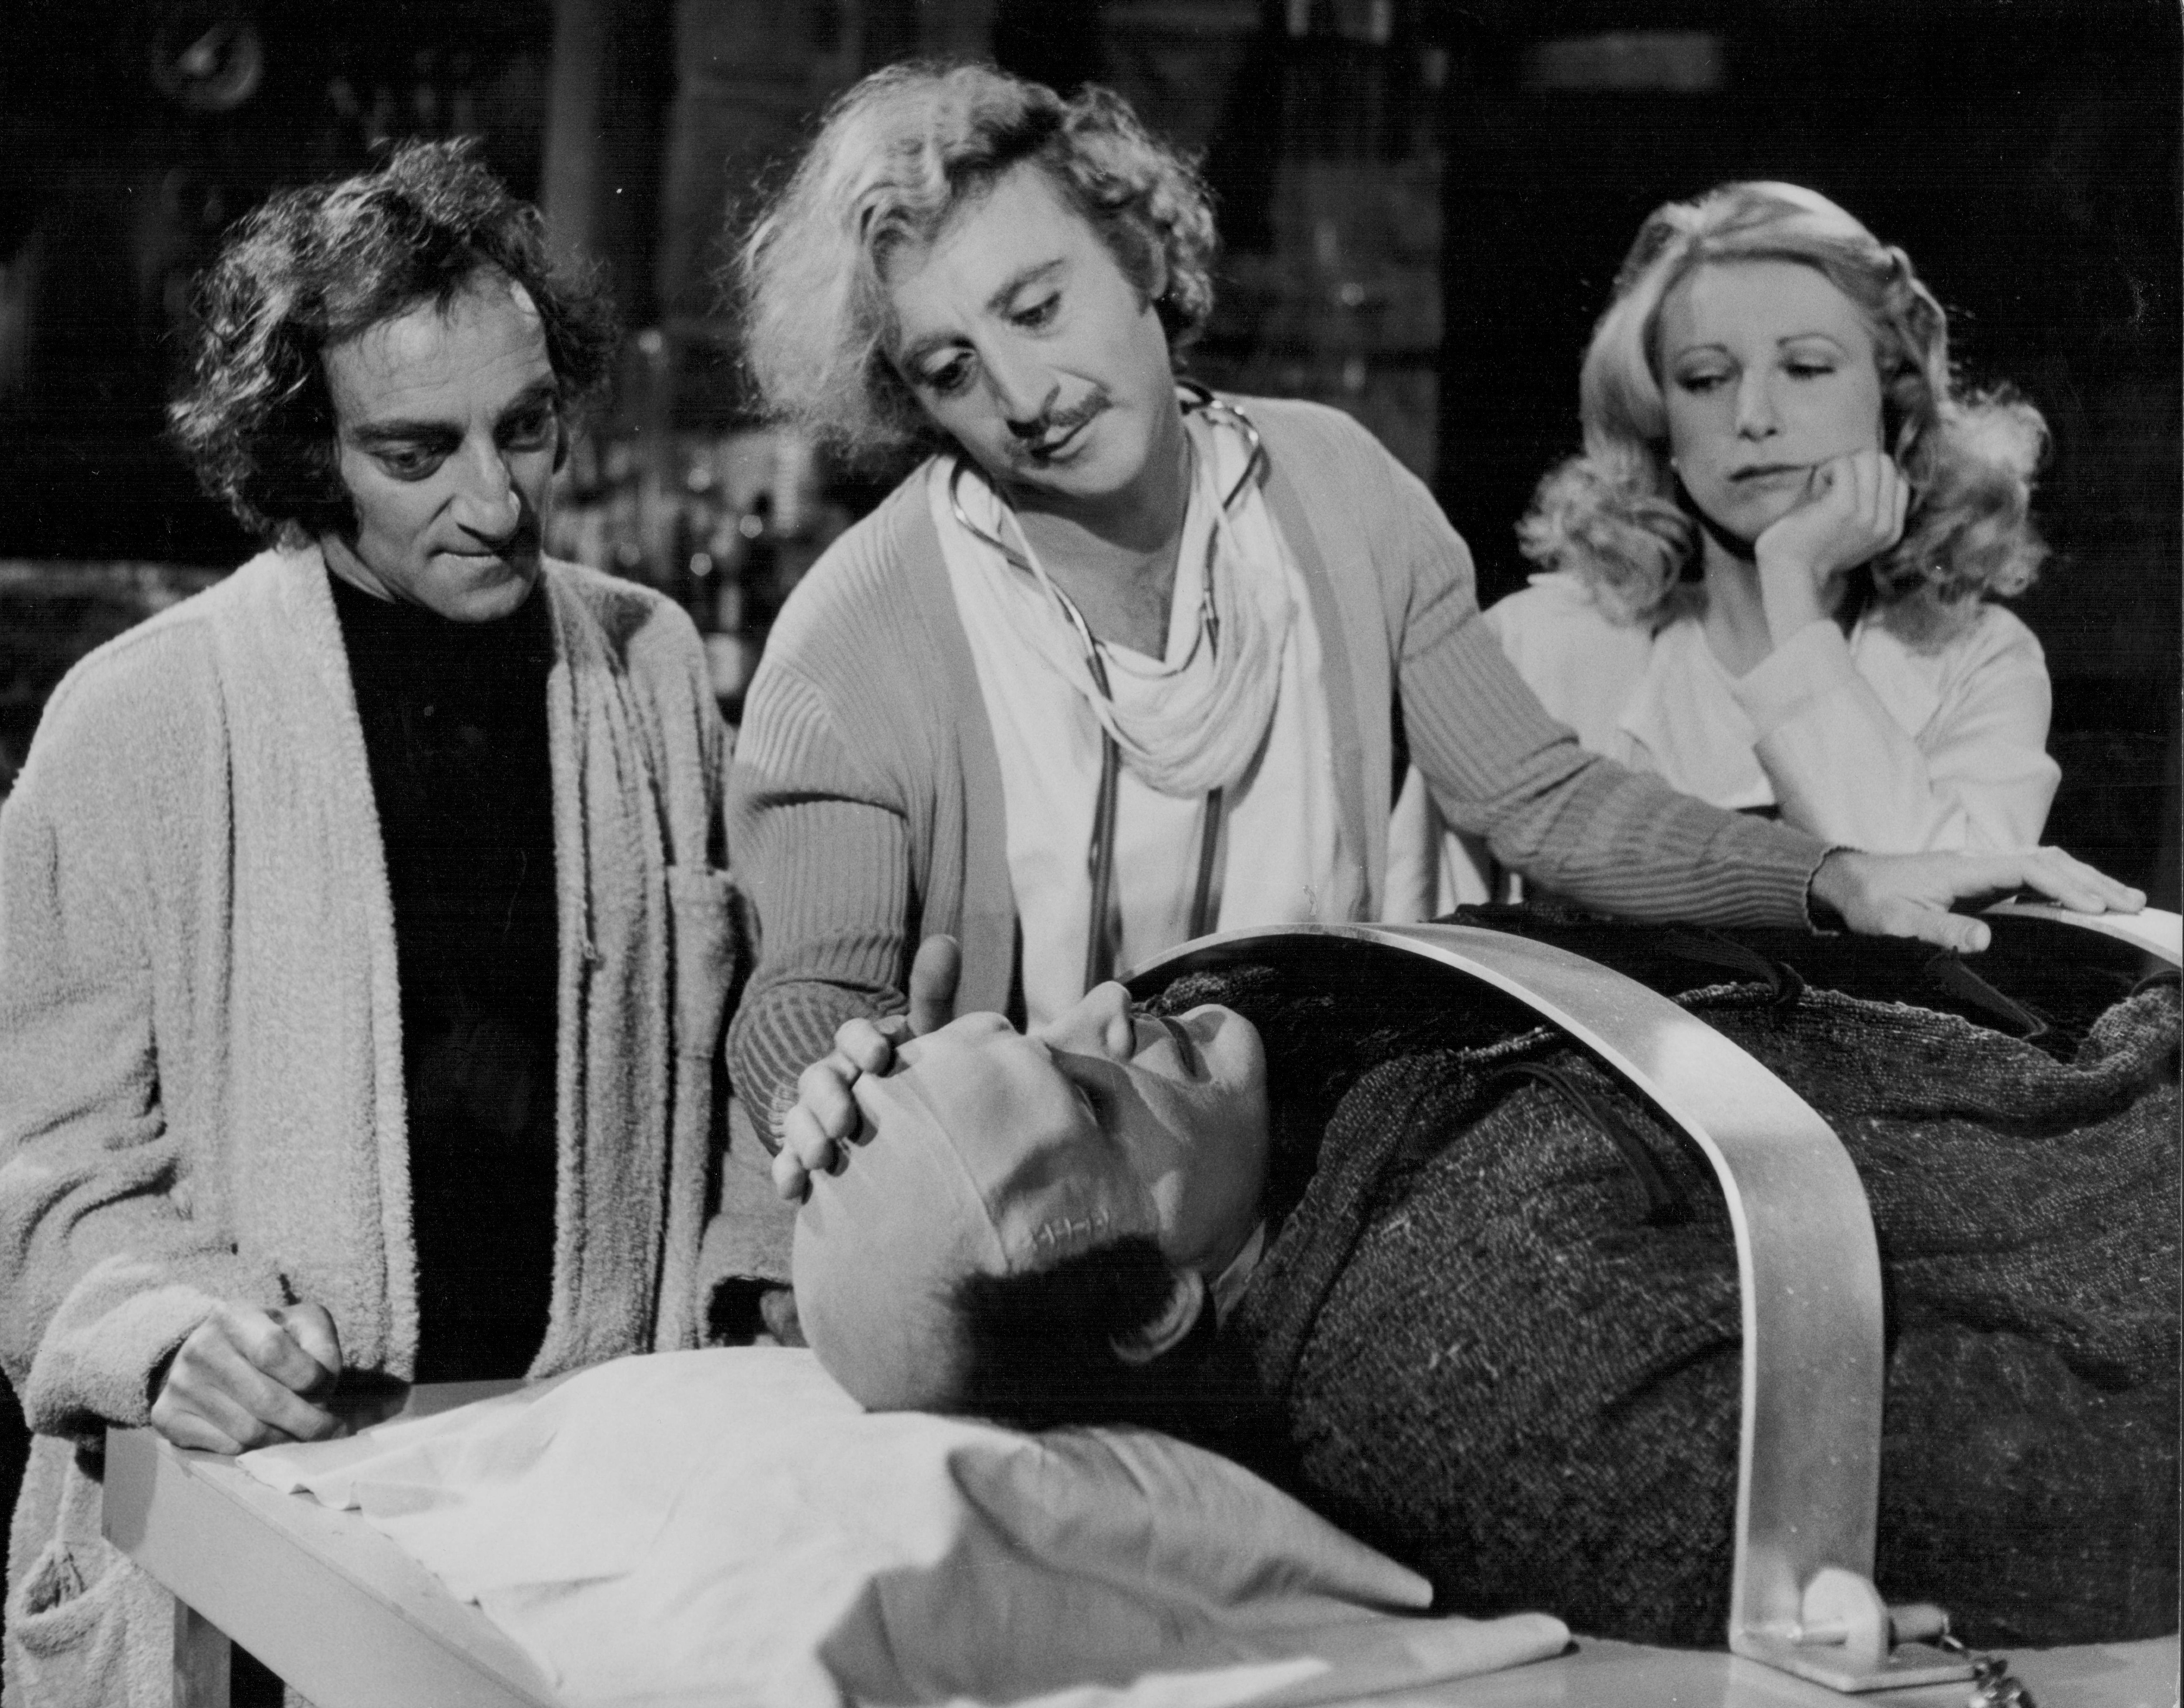 Young Frankenstein, 1974 via Getty Images